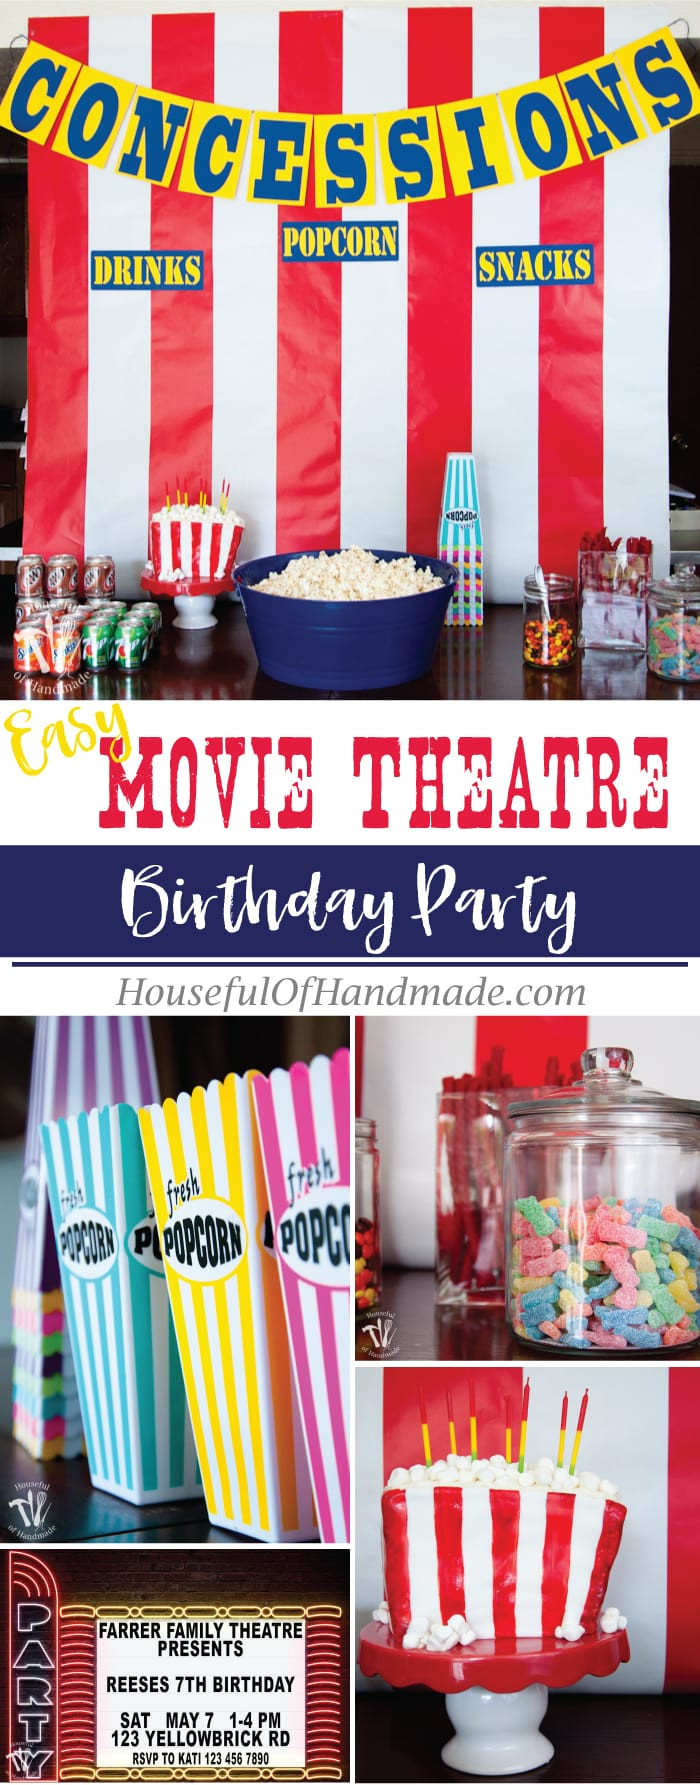 Movie Theatre Birthday Party
 Movie Theatre Themed Birthday Party a Houseful of Handmade